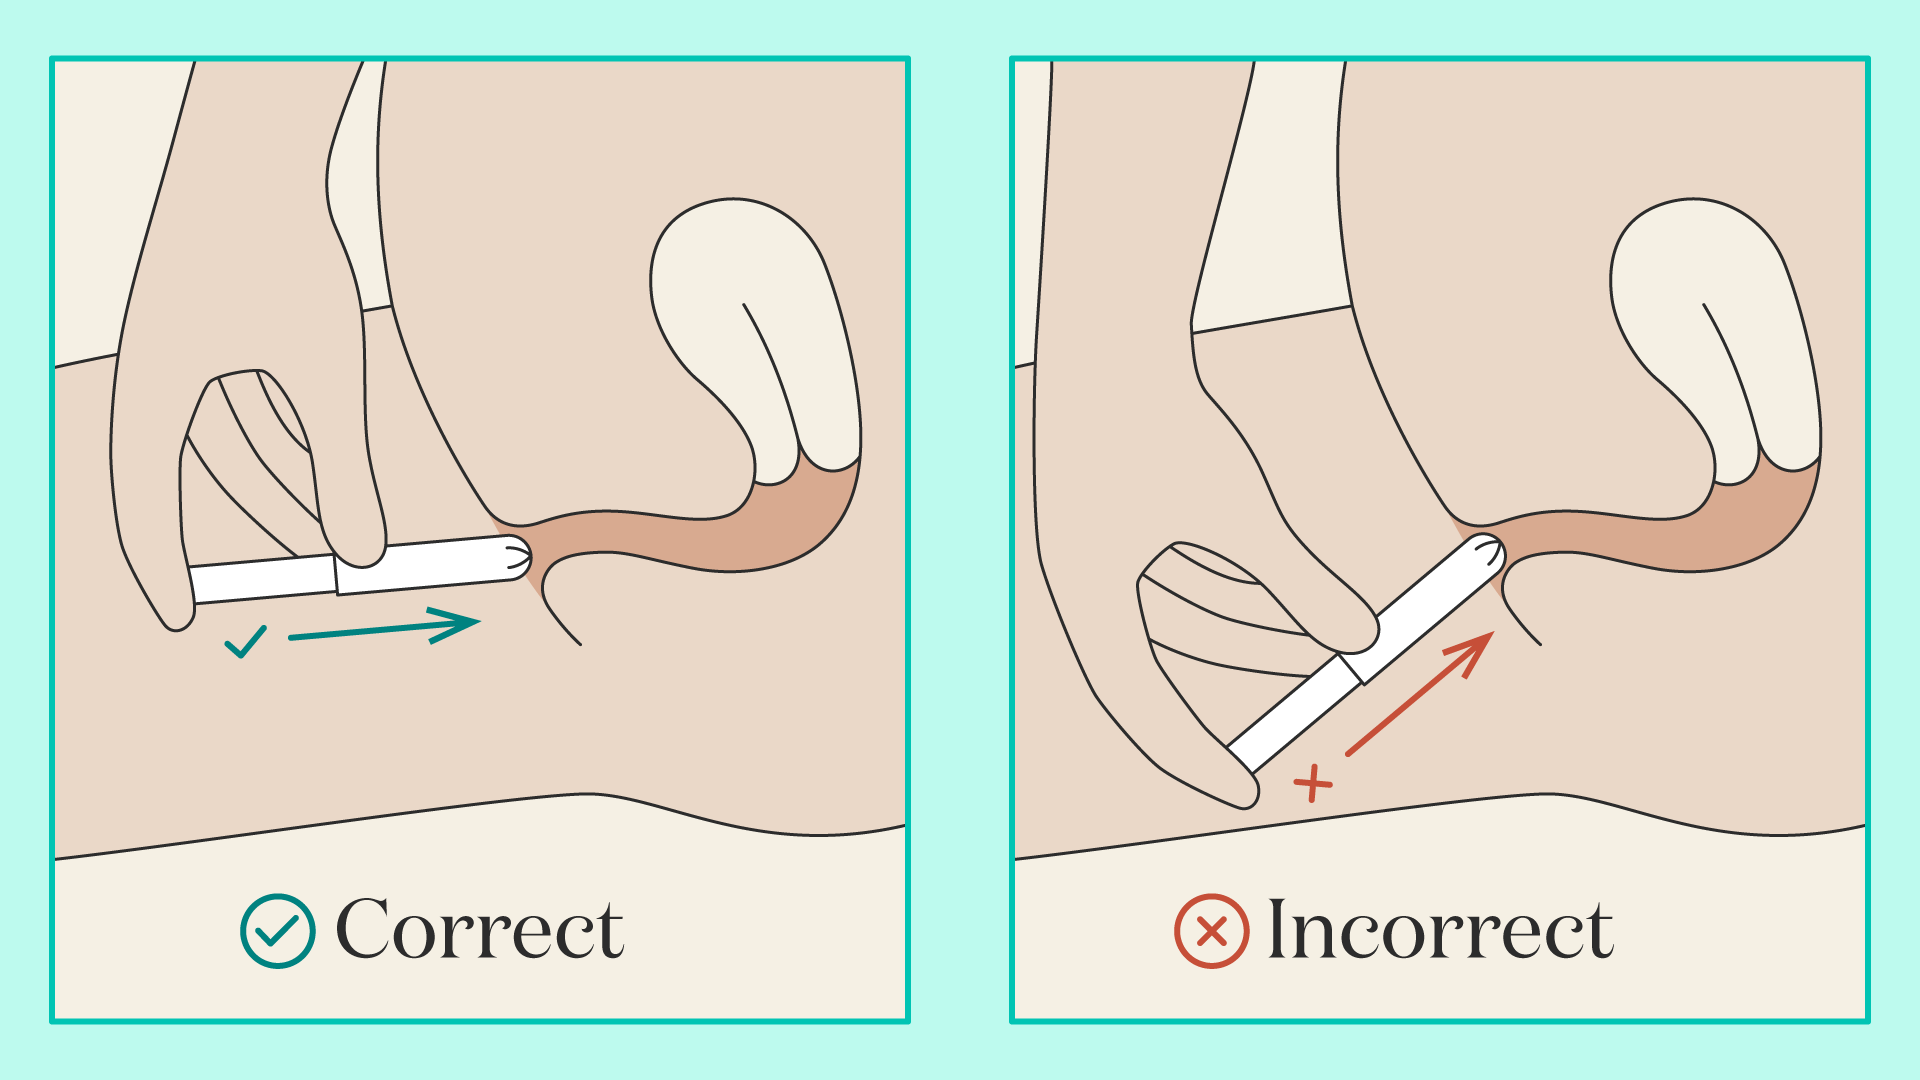 Does it Hurt to Insert a Tampon? Try These Smaller Period Products